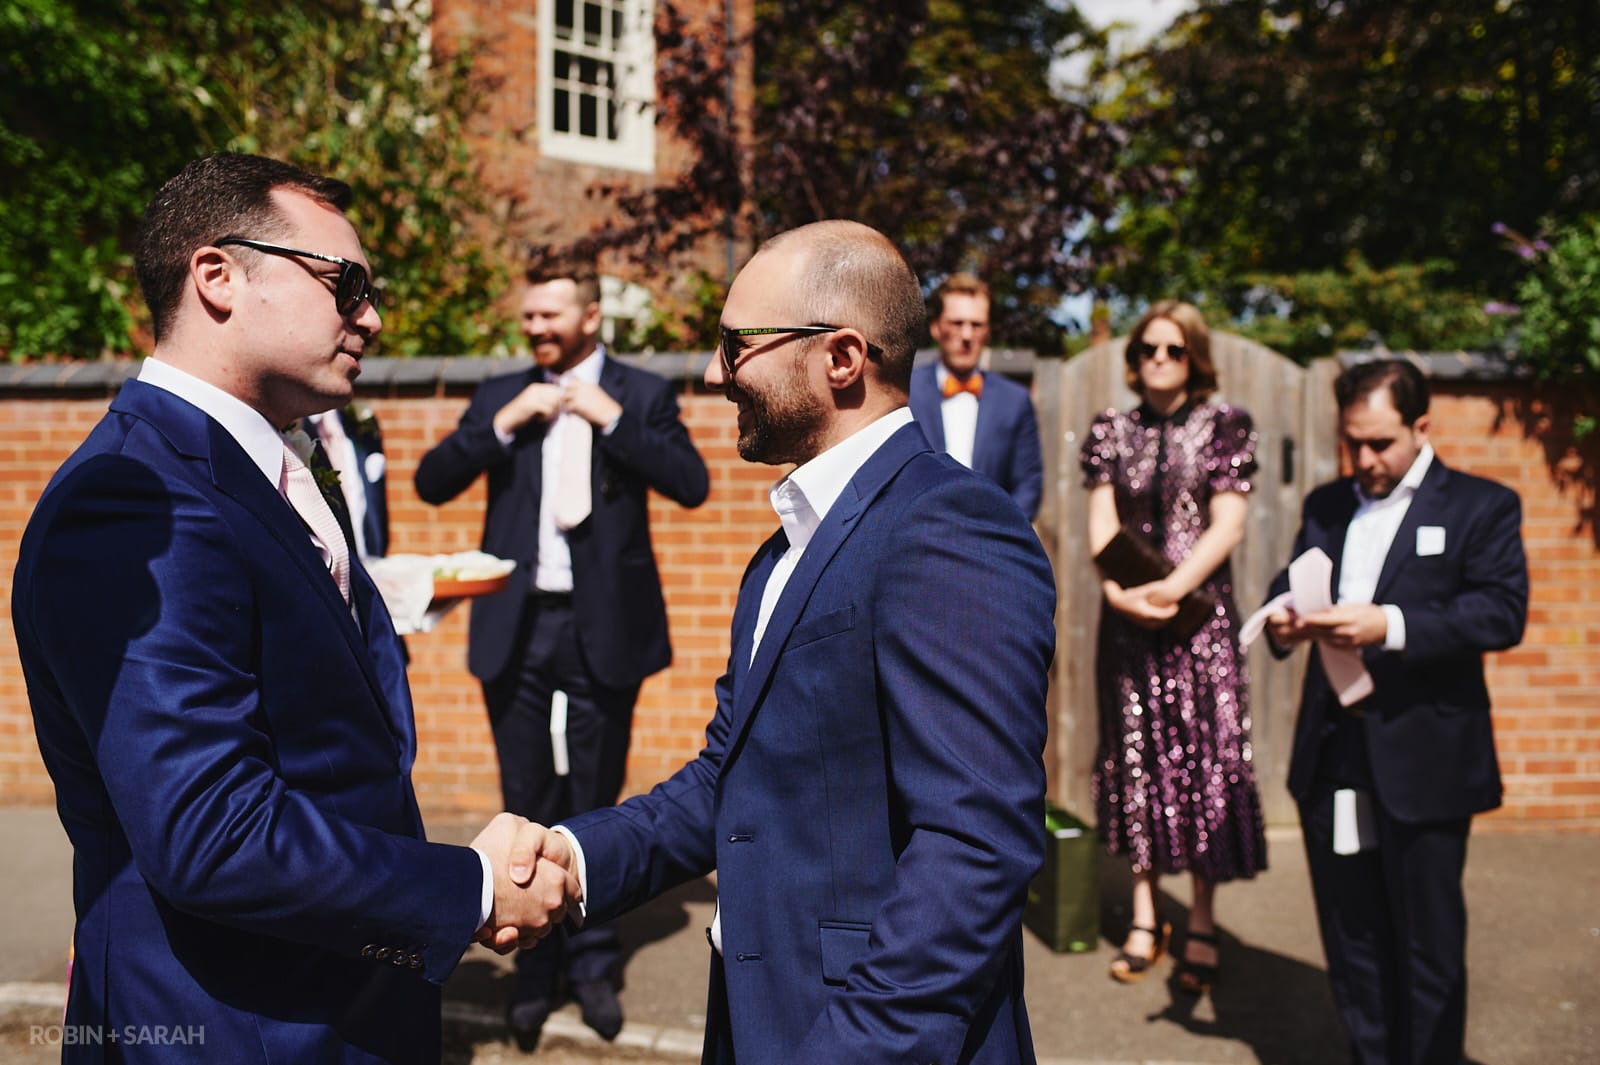 Groom greets wedding guests at Peter's church Dunchurch